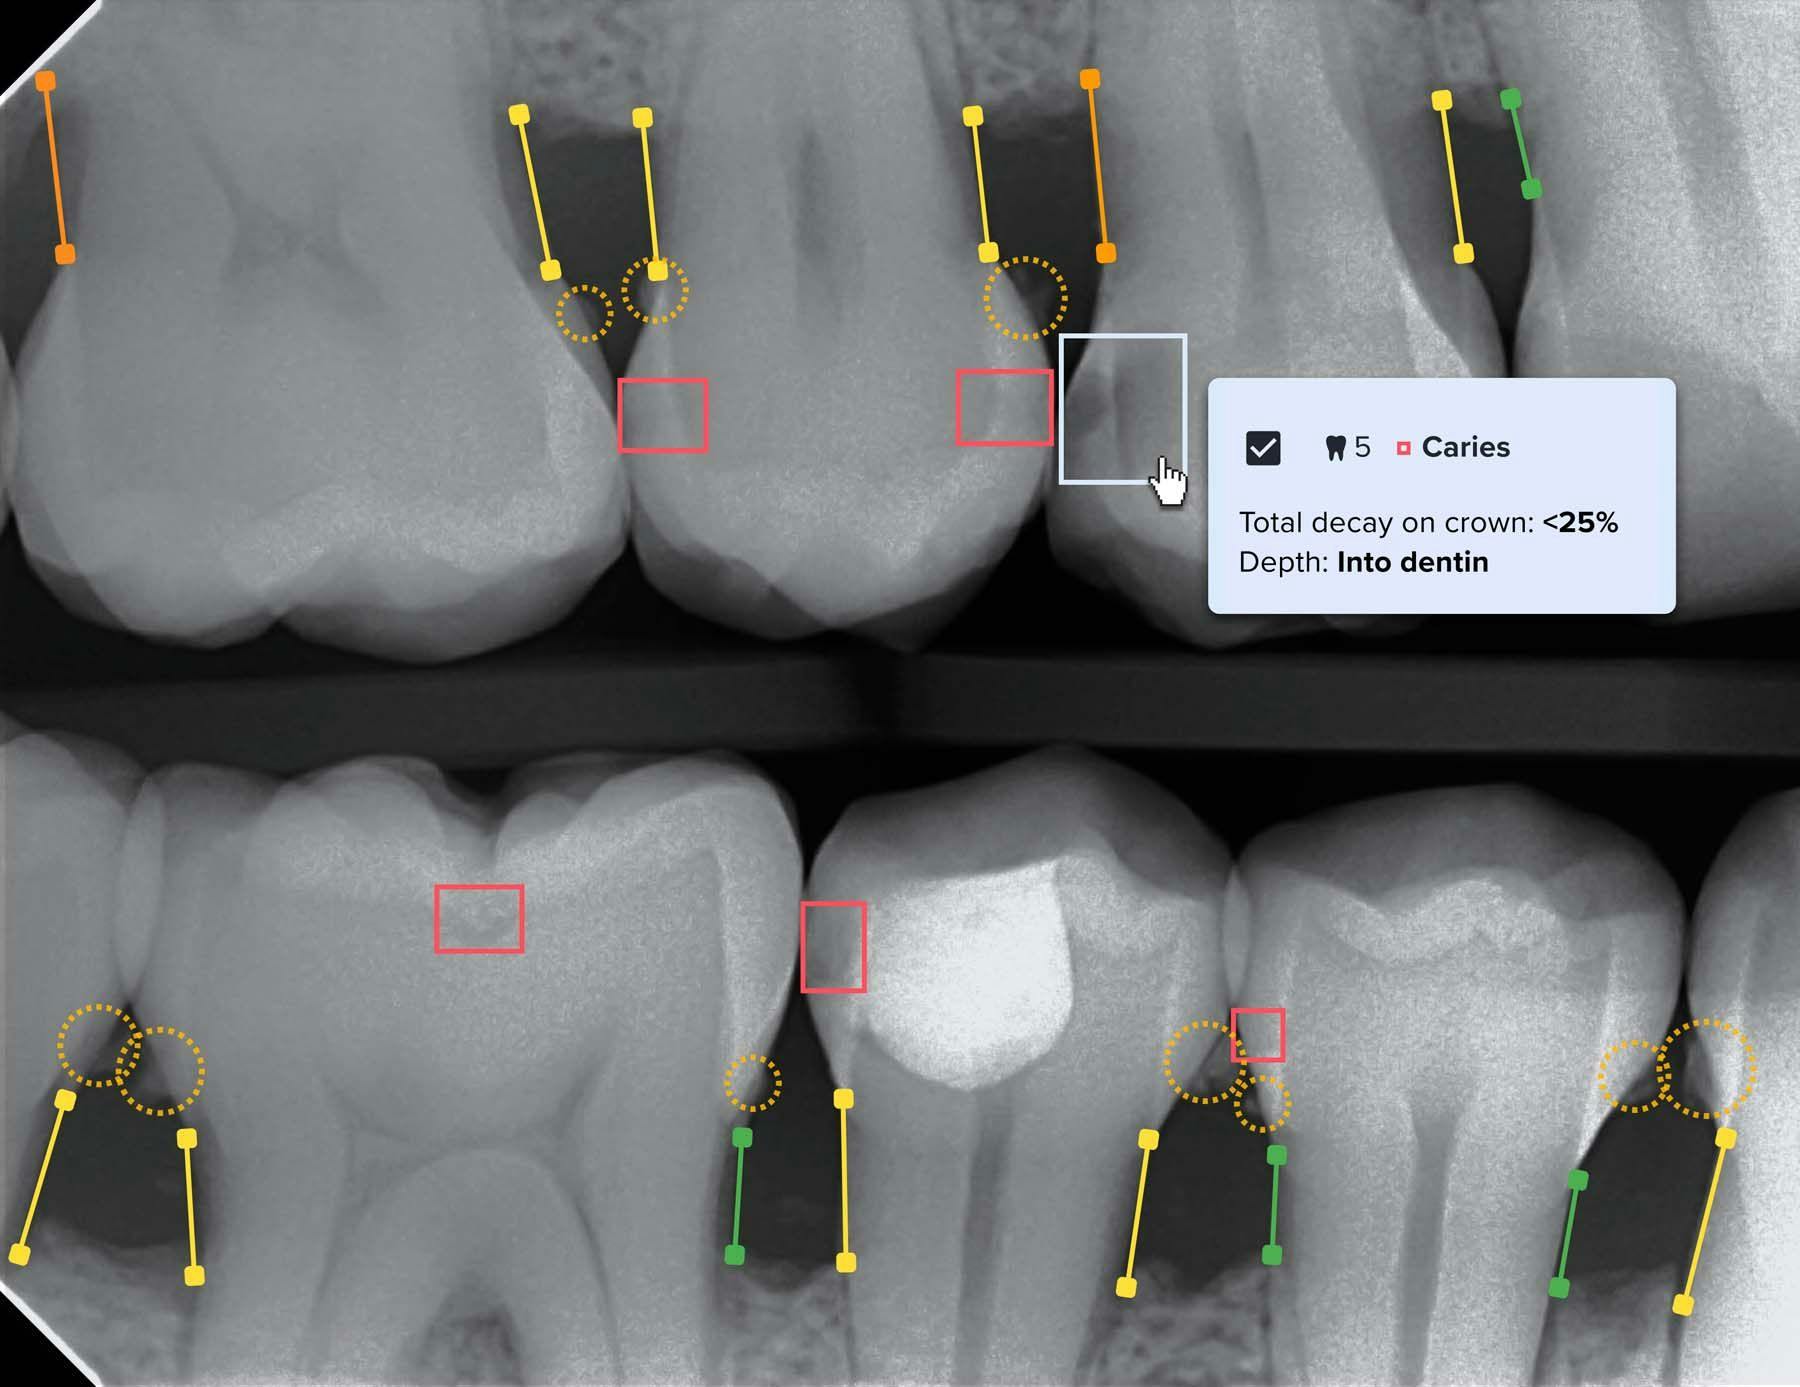 Videa Dental Assist uses AI technology to assist clinicians in diagnosing x-rays and in recommending treatment plans for patients. | Image Credit: © VideaHealth